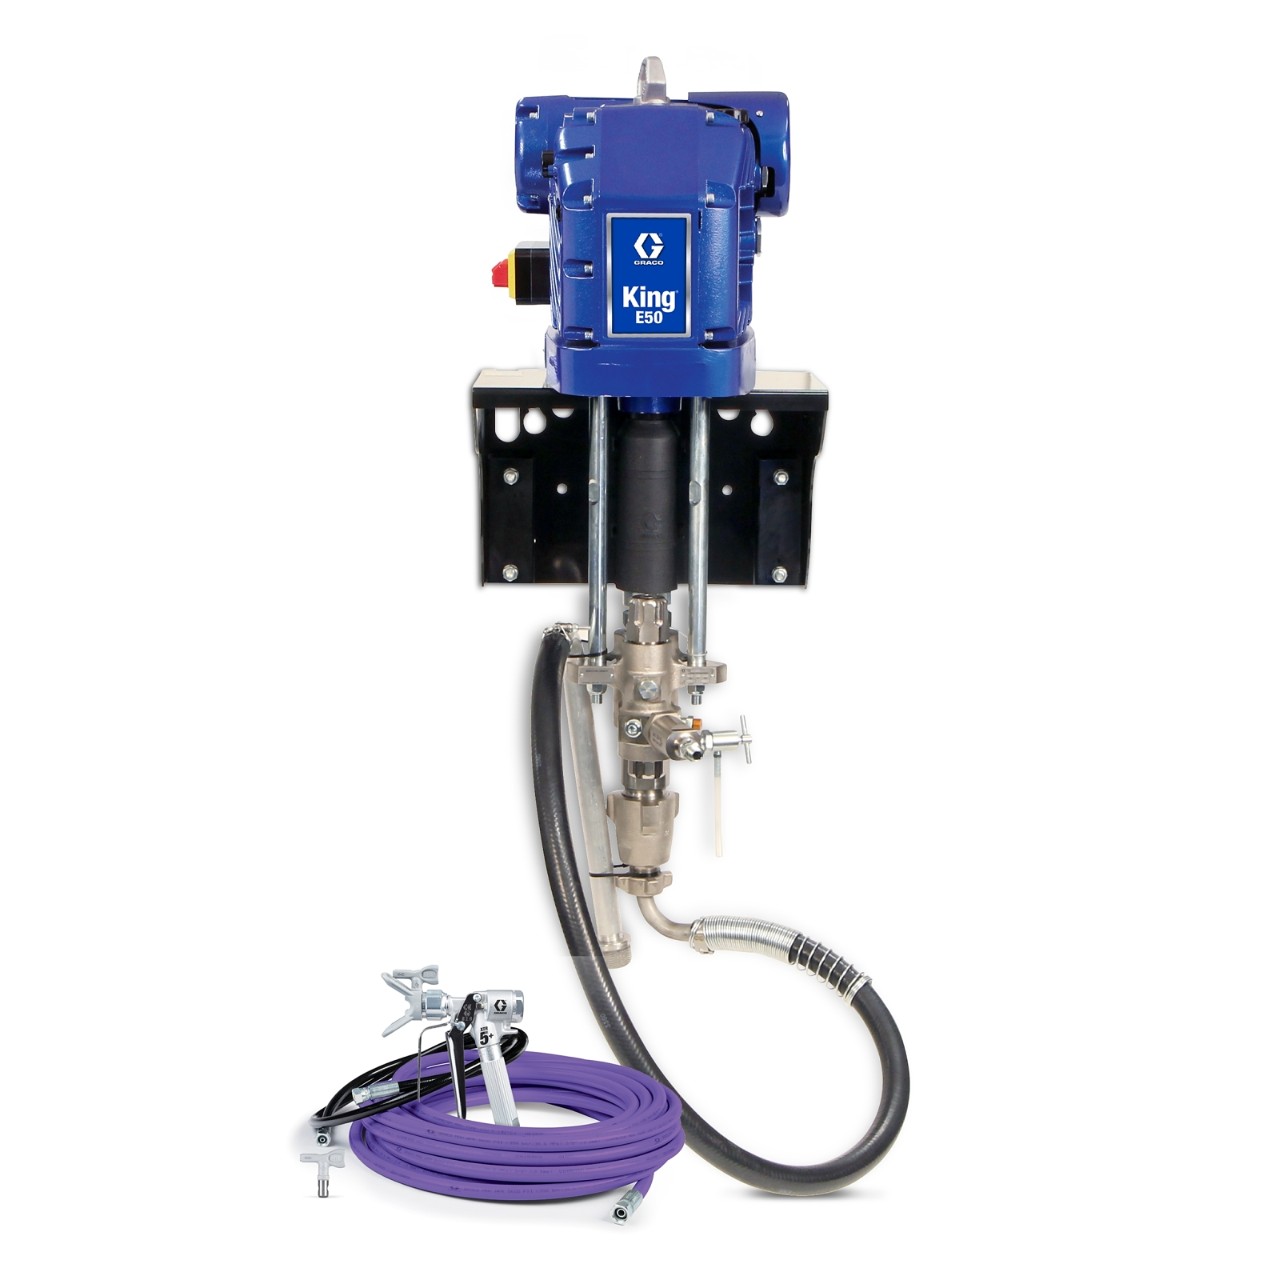 Graco® Contractor King® Air Powered Airless Sprayer